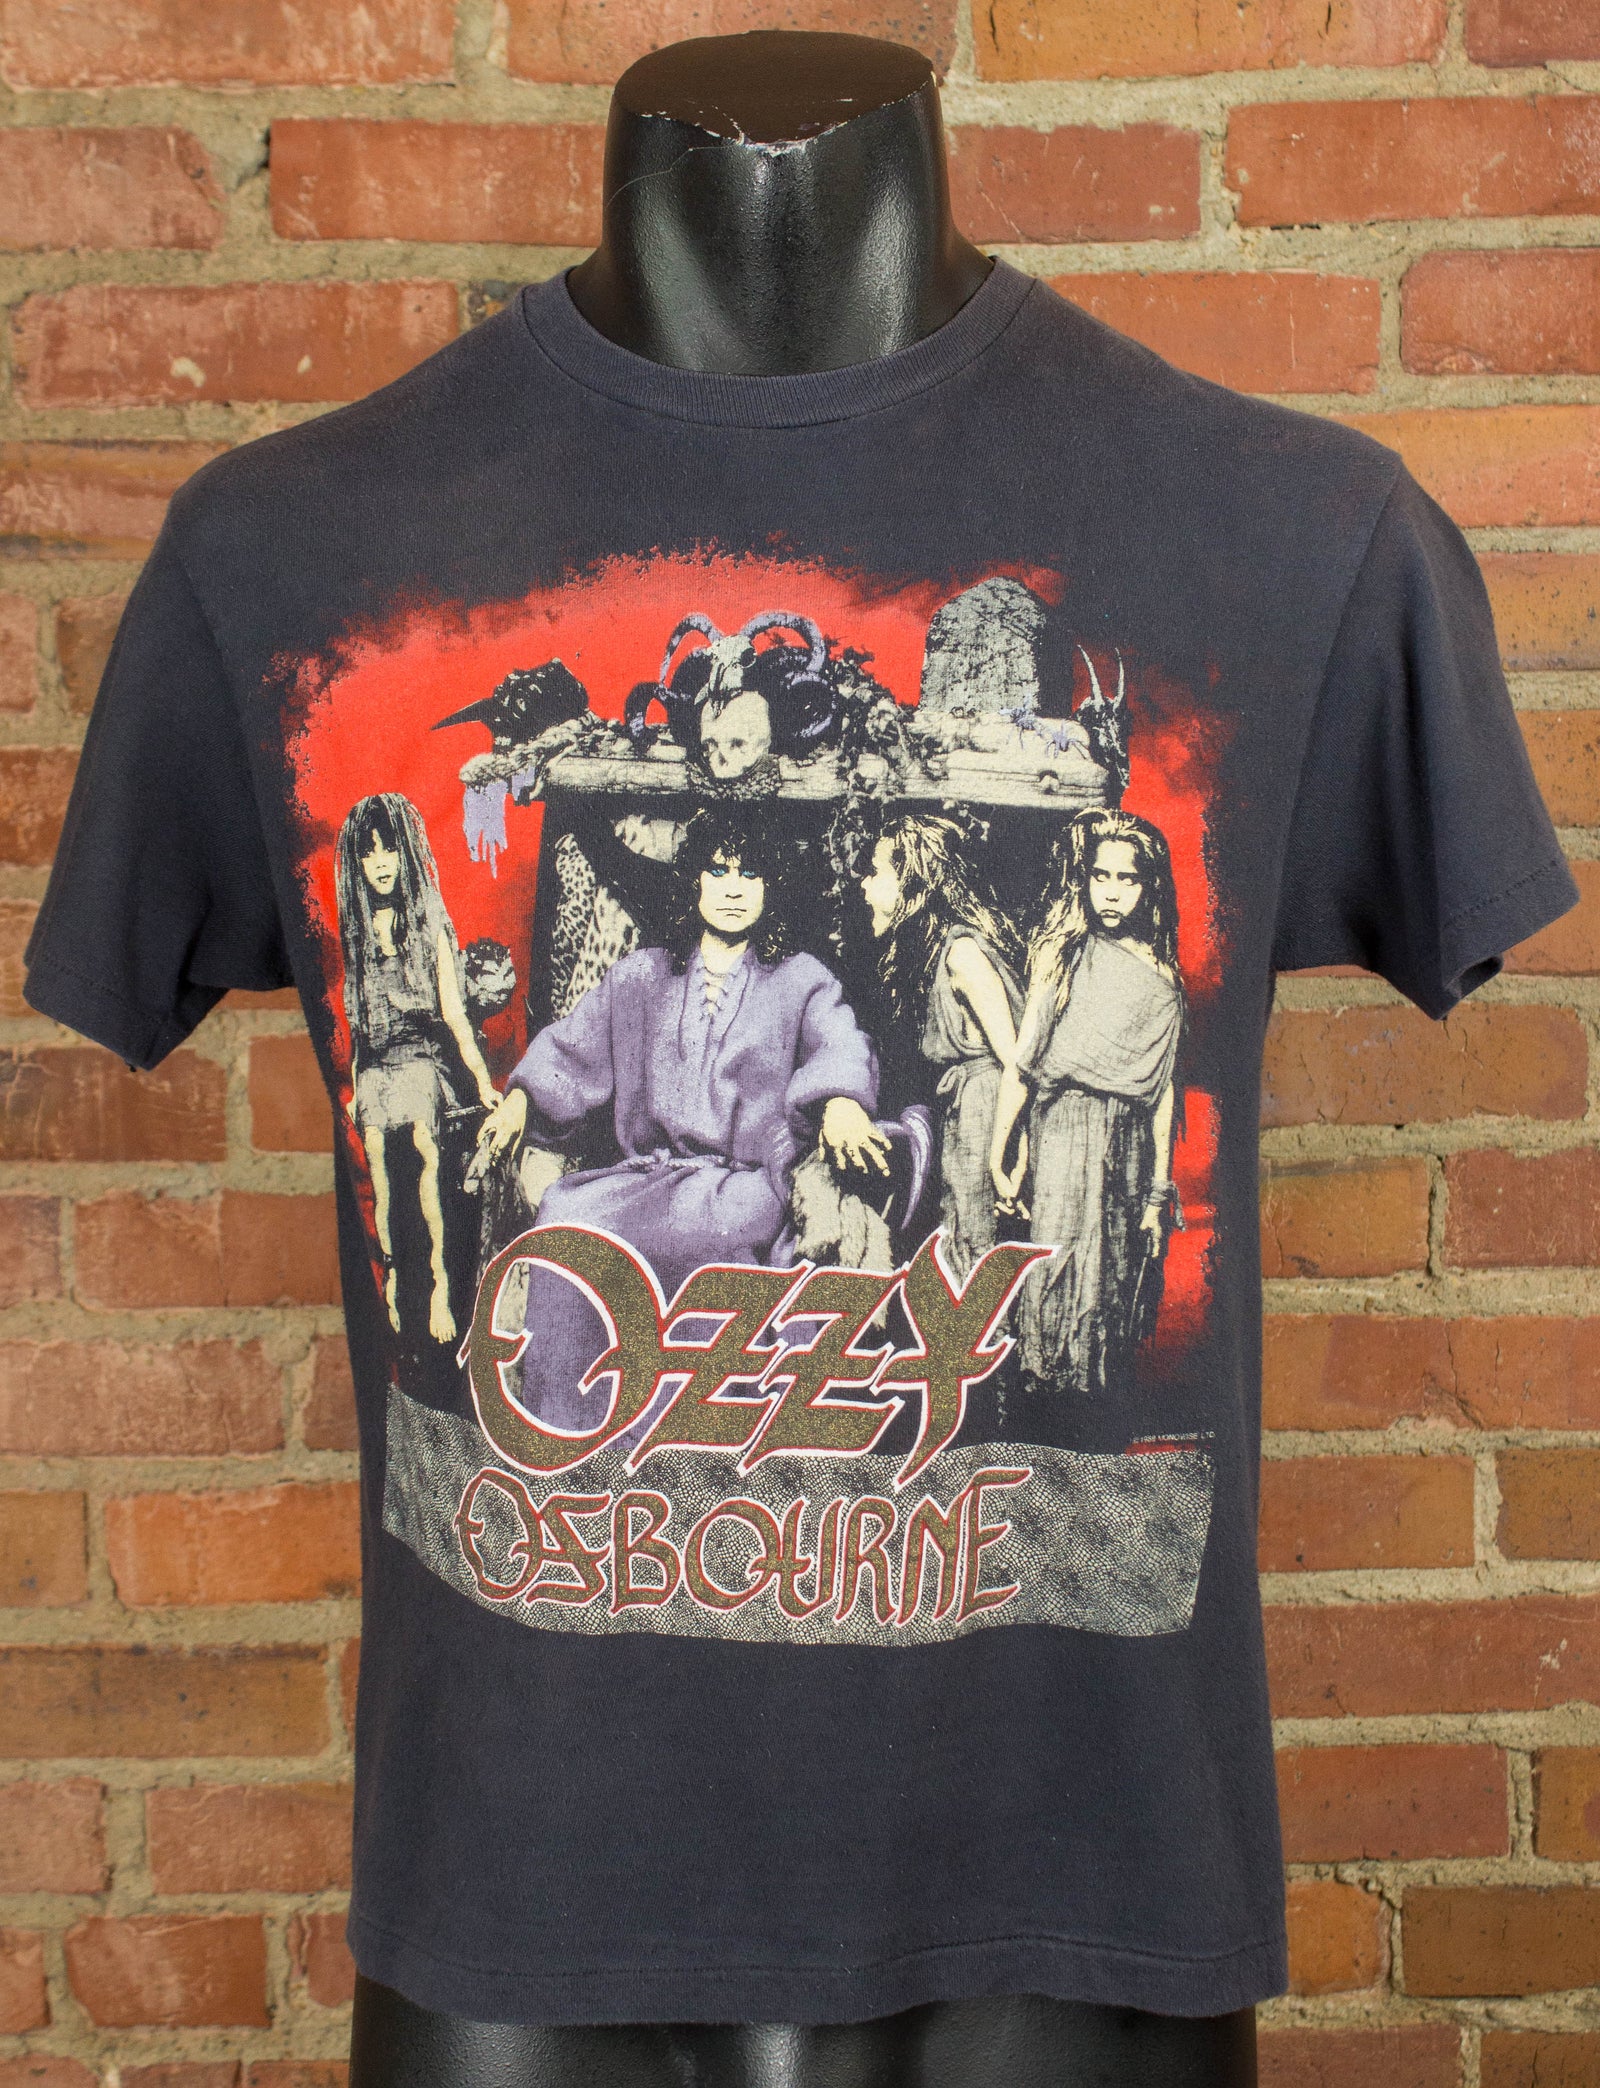 Vintage Ozzy Osbourne Concert T Shirt 1988-1989 No Rest For The Wicked Tour Medium